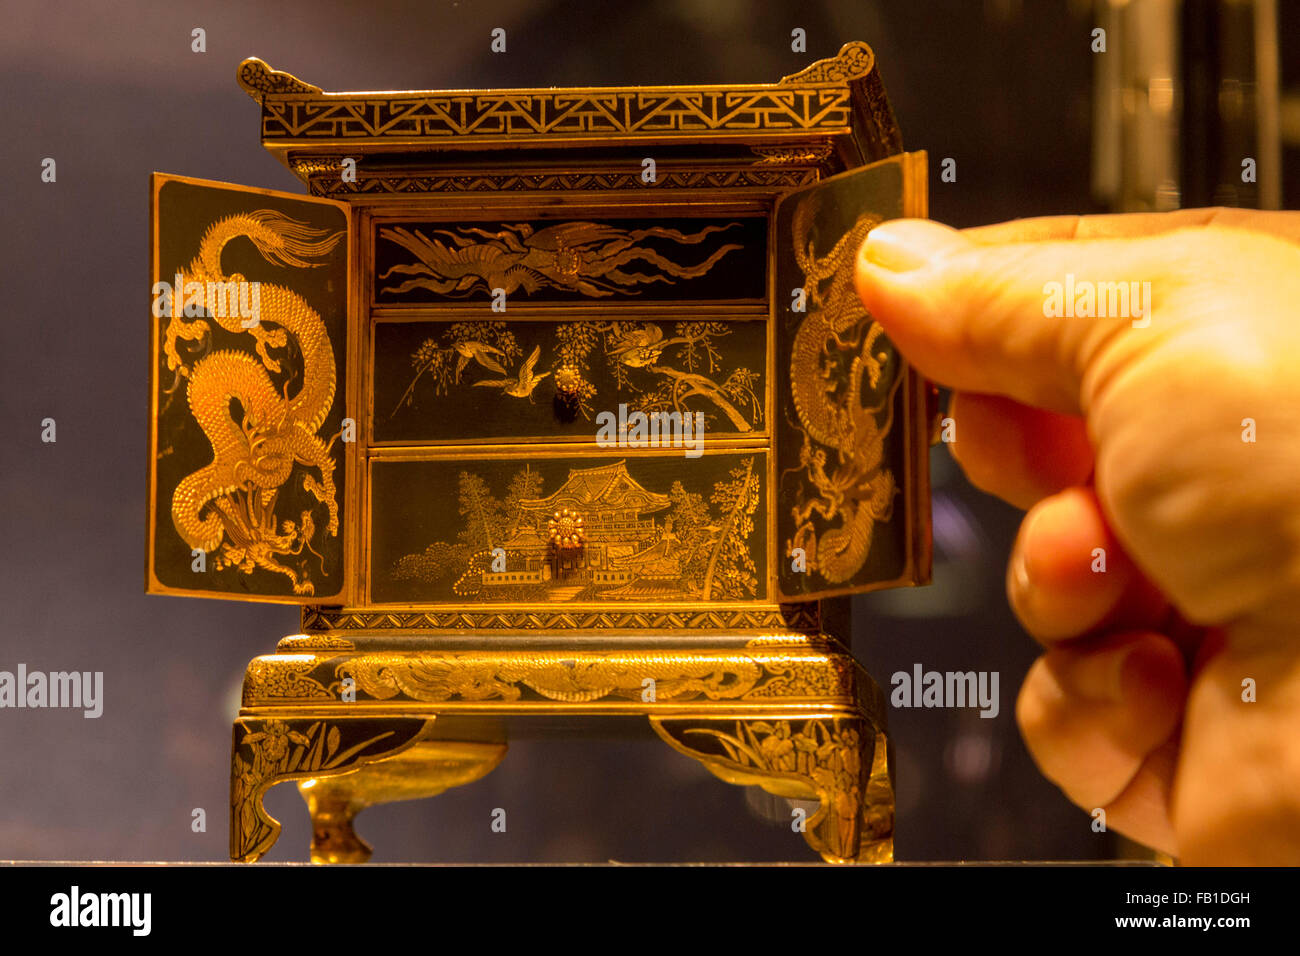 London, UK. 7 January 2016. A parcel gilt bronze inlaid miniature cabinet on self-stand, circa 1900, 12cm high, GBP 8850 from Hickmet Fine Arts. The Mayfair Antiques and Fine Art Fair opens with an impressive array of unique and rare antiques for sale from around the world at The London Marriott Hotel Grosvenor Square and runs until 10 January. Stock Photo